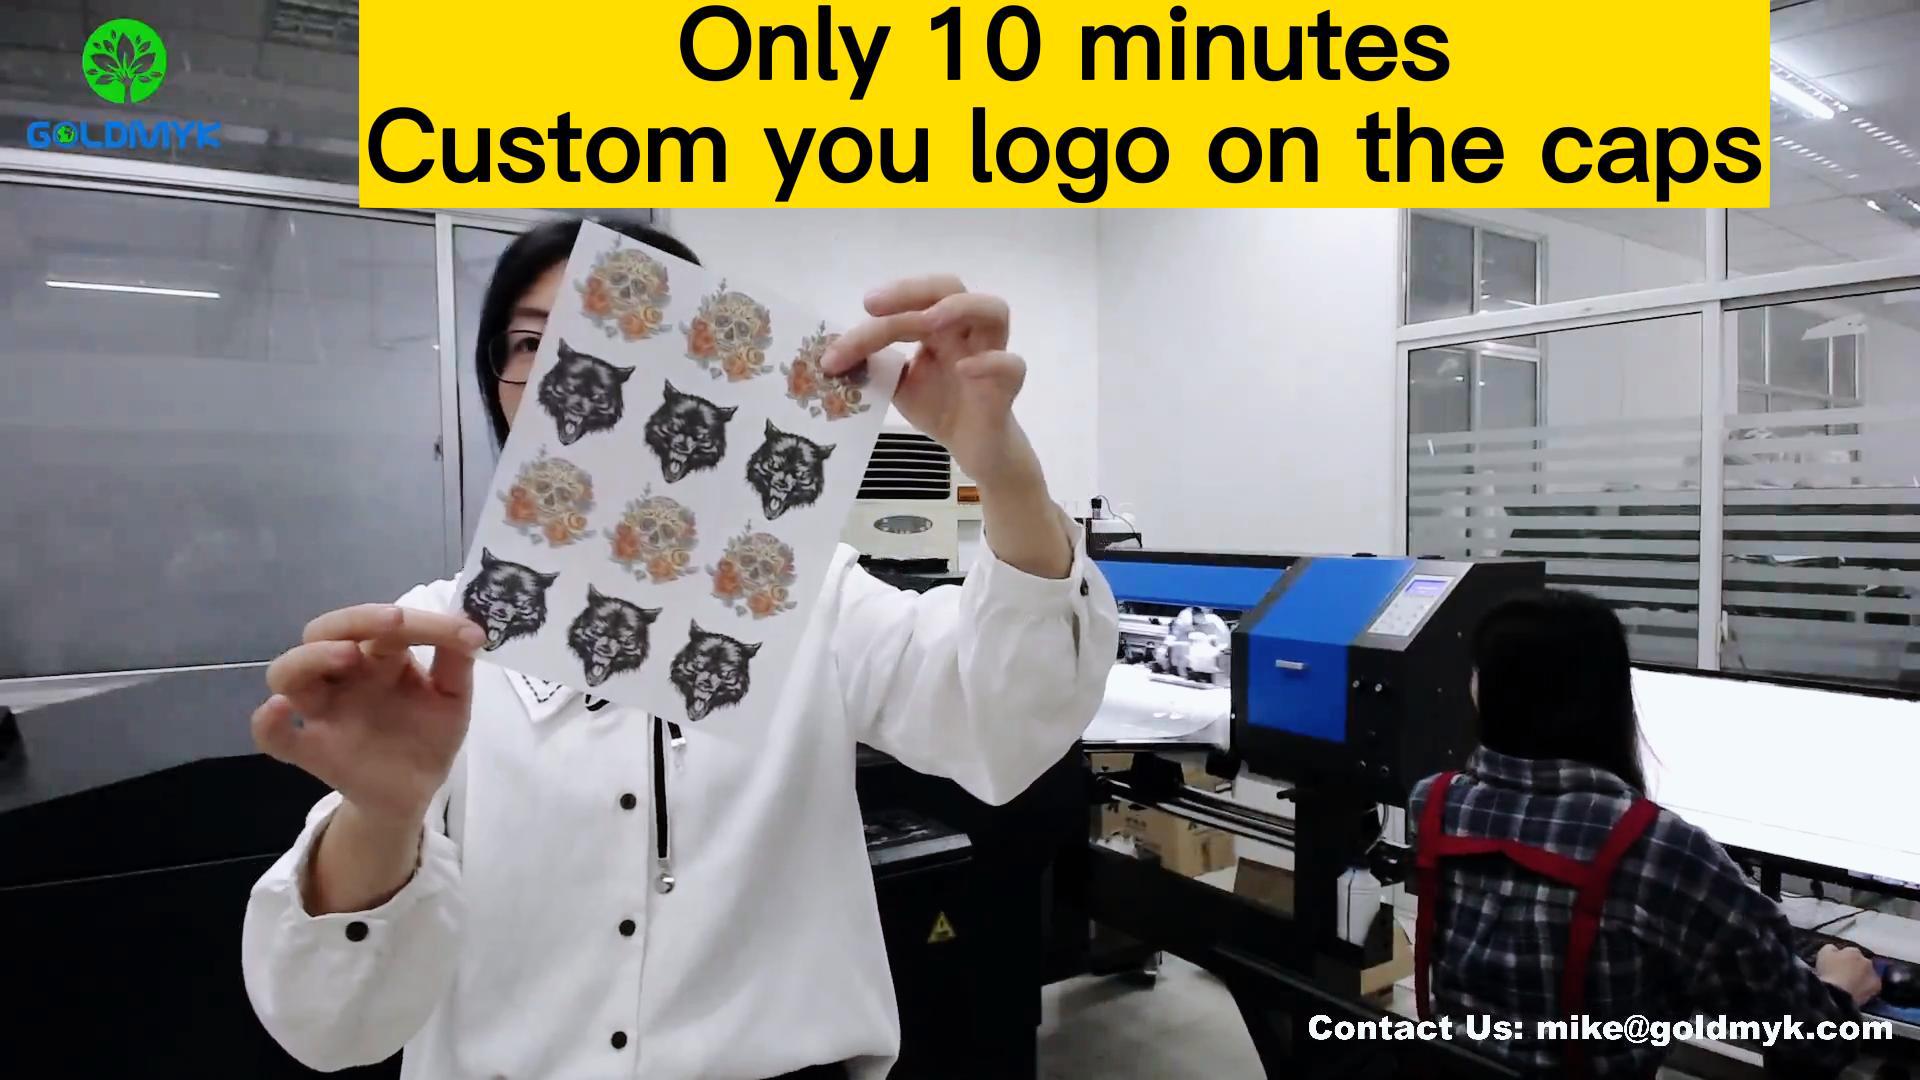 Only 10 minutes, custom your own logo on our caps and hats in 3 steps.